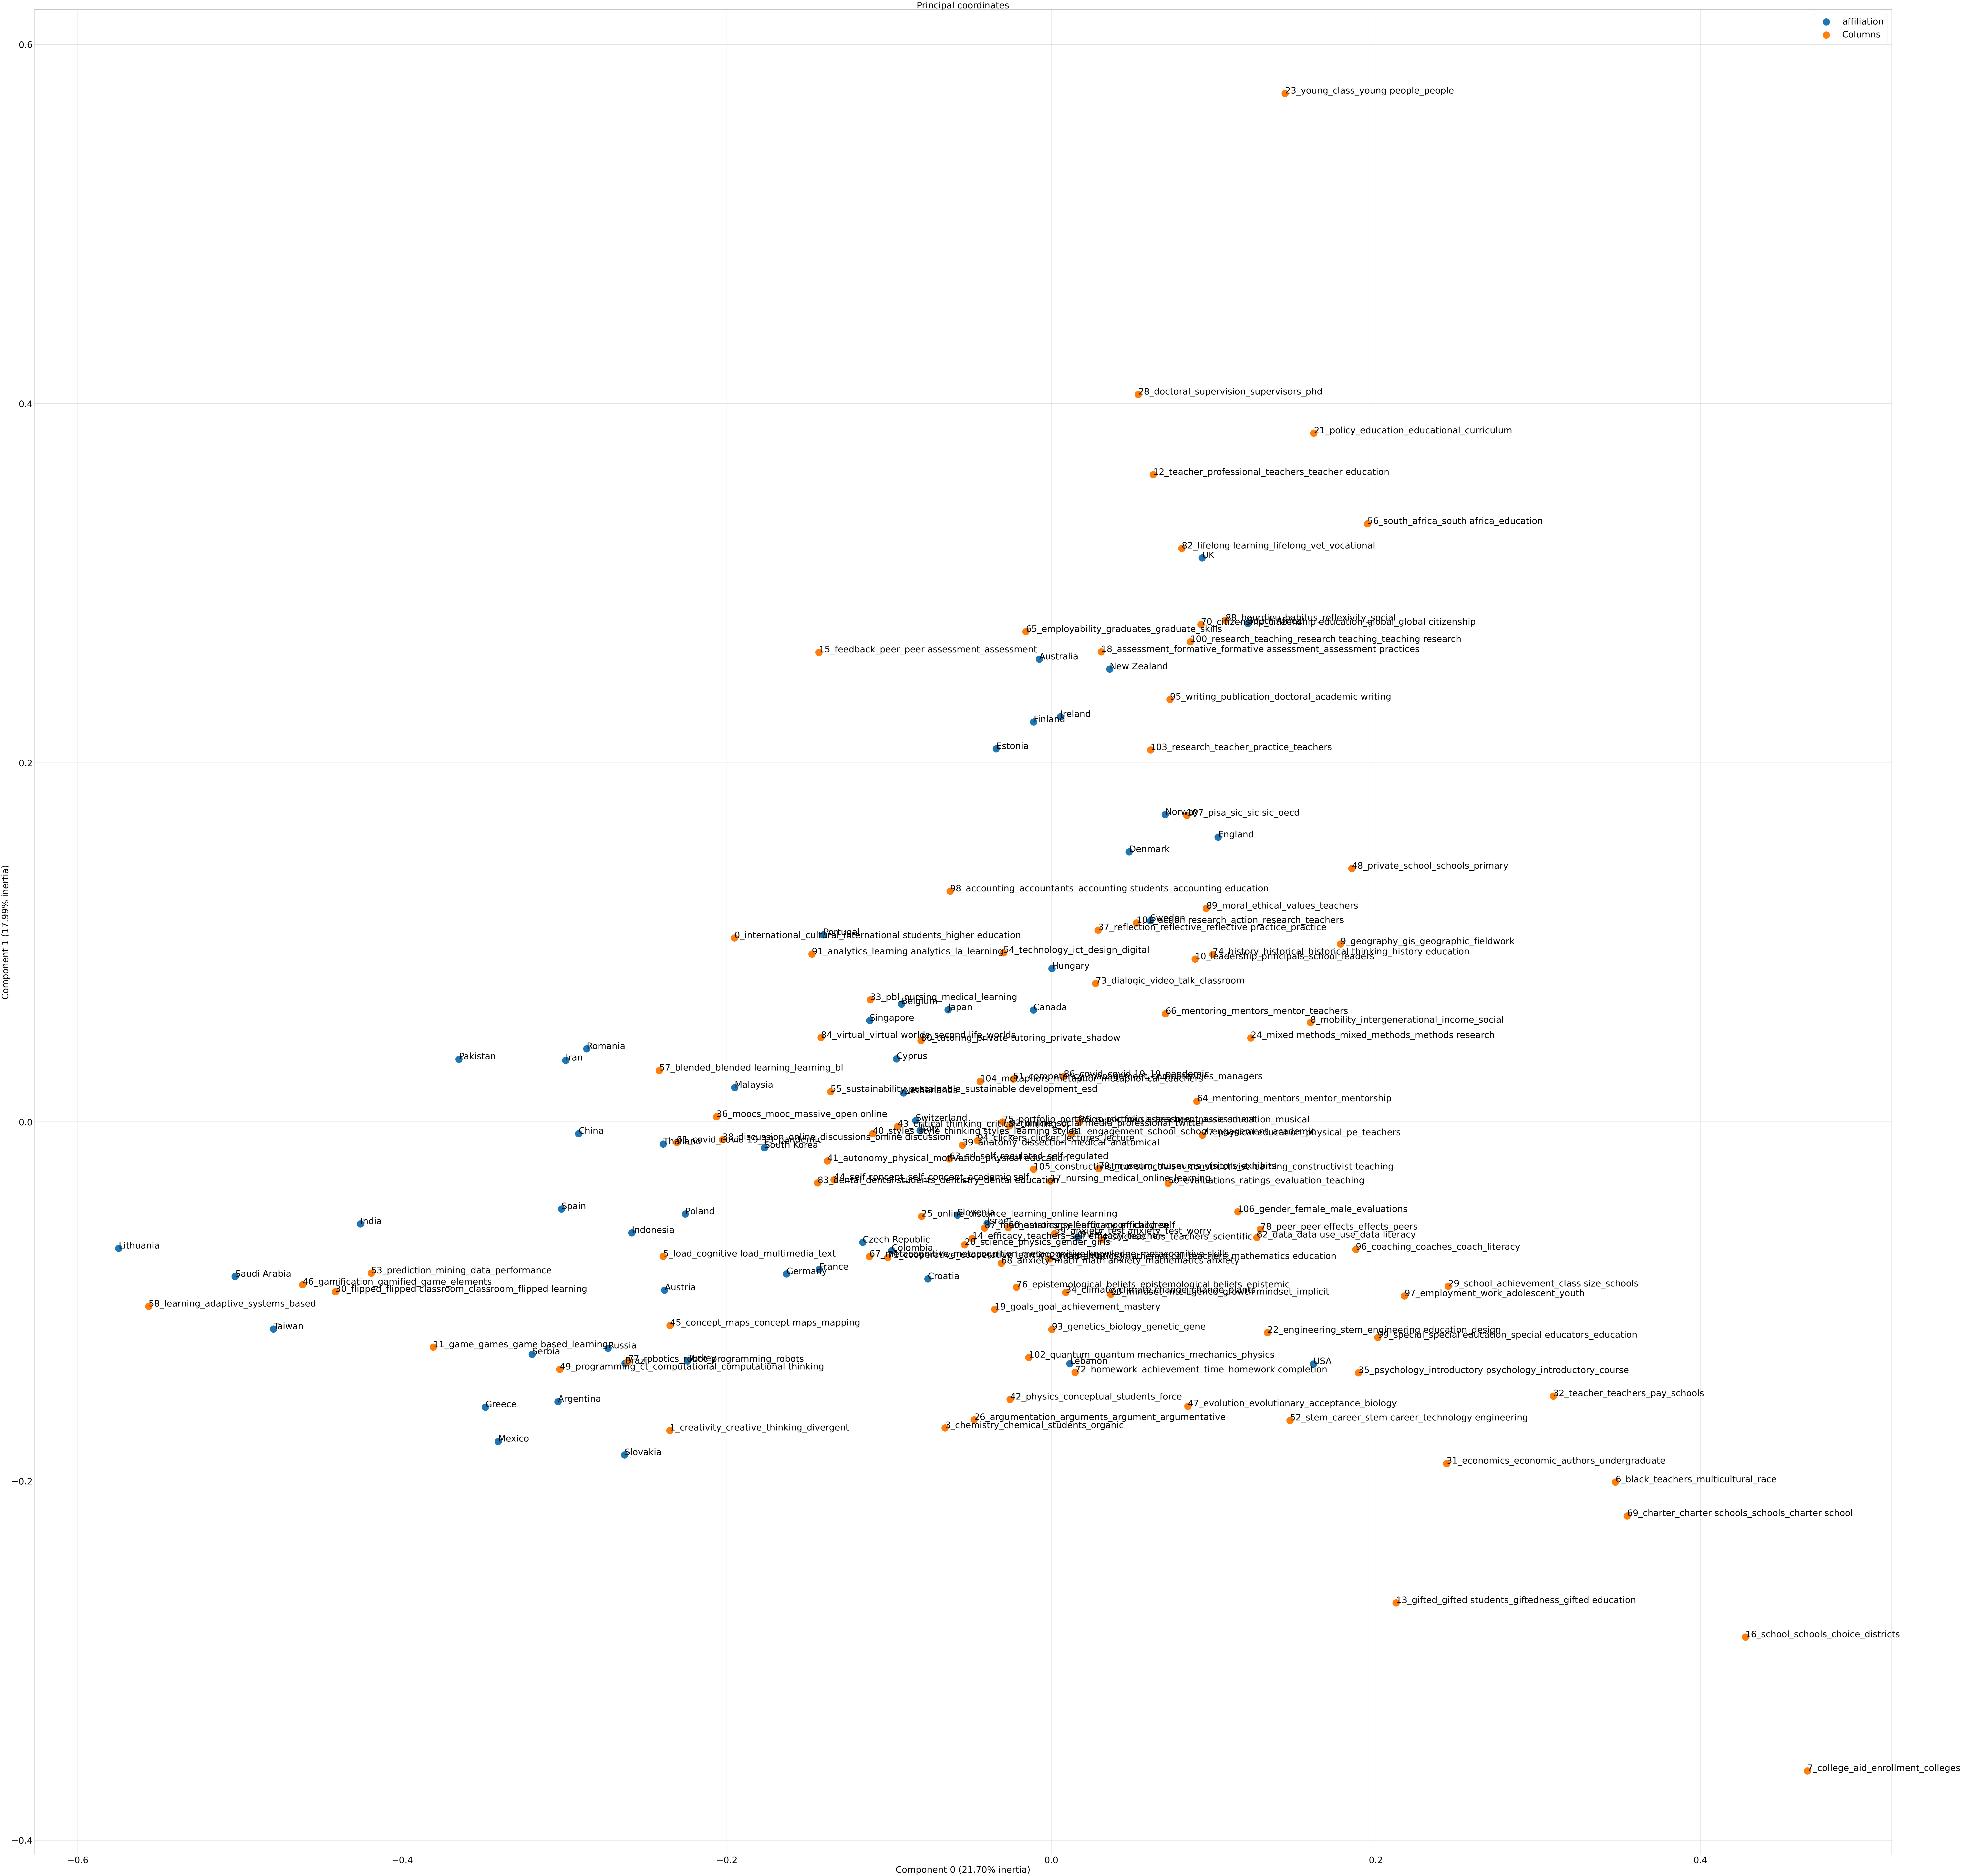 Correspondence analysis visualization over topics and author affiliation.